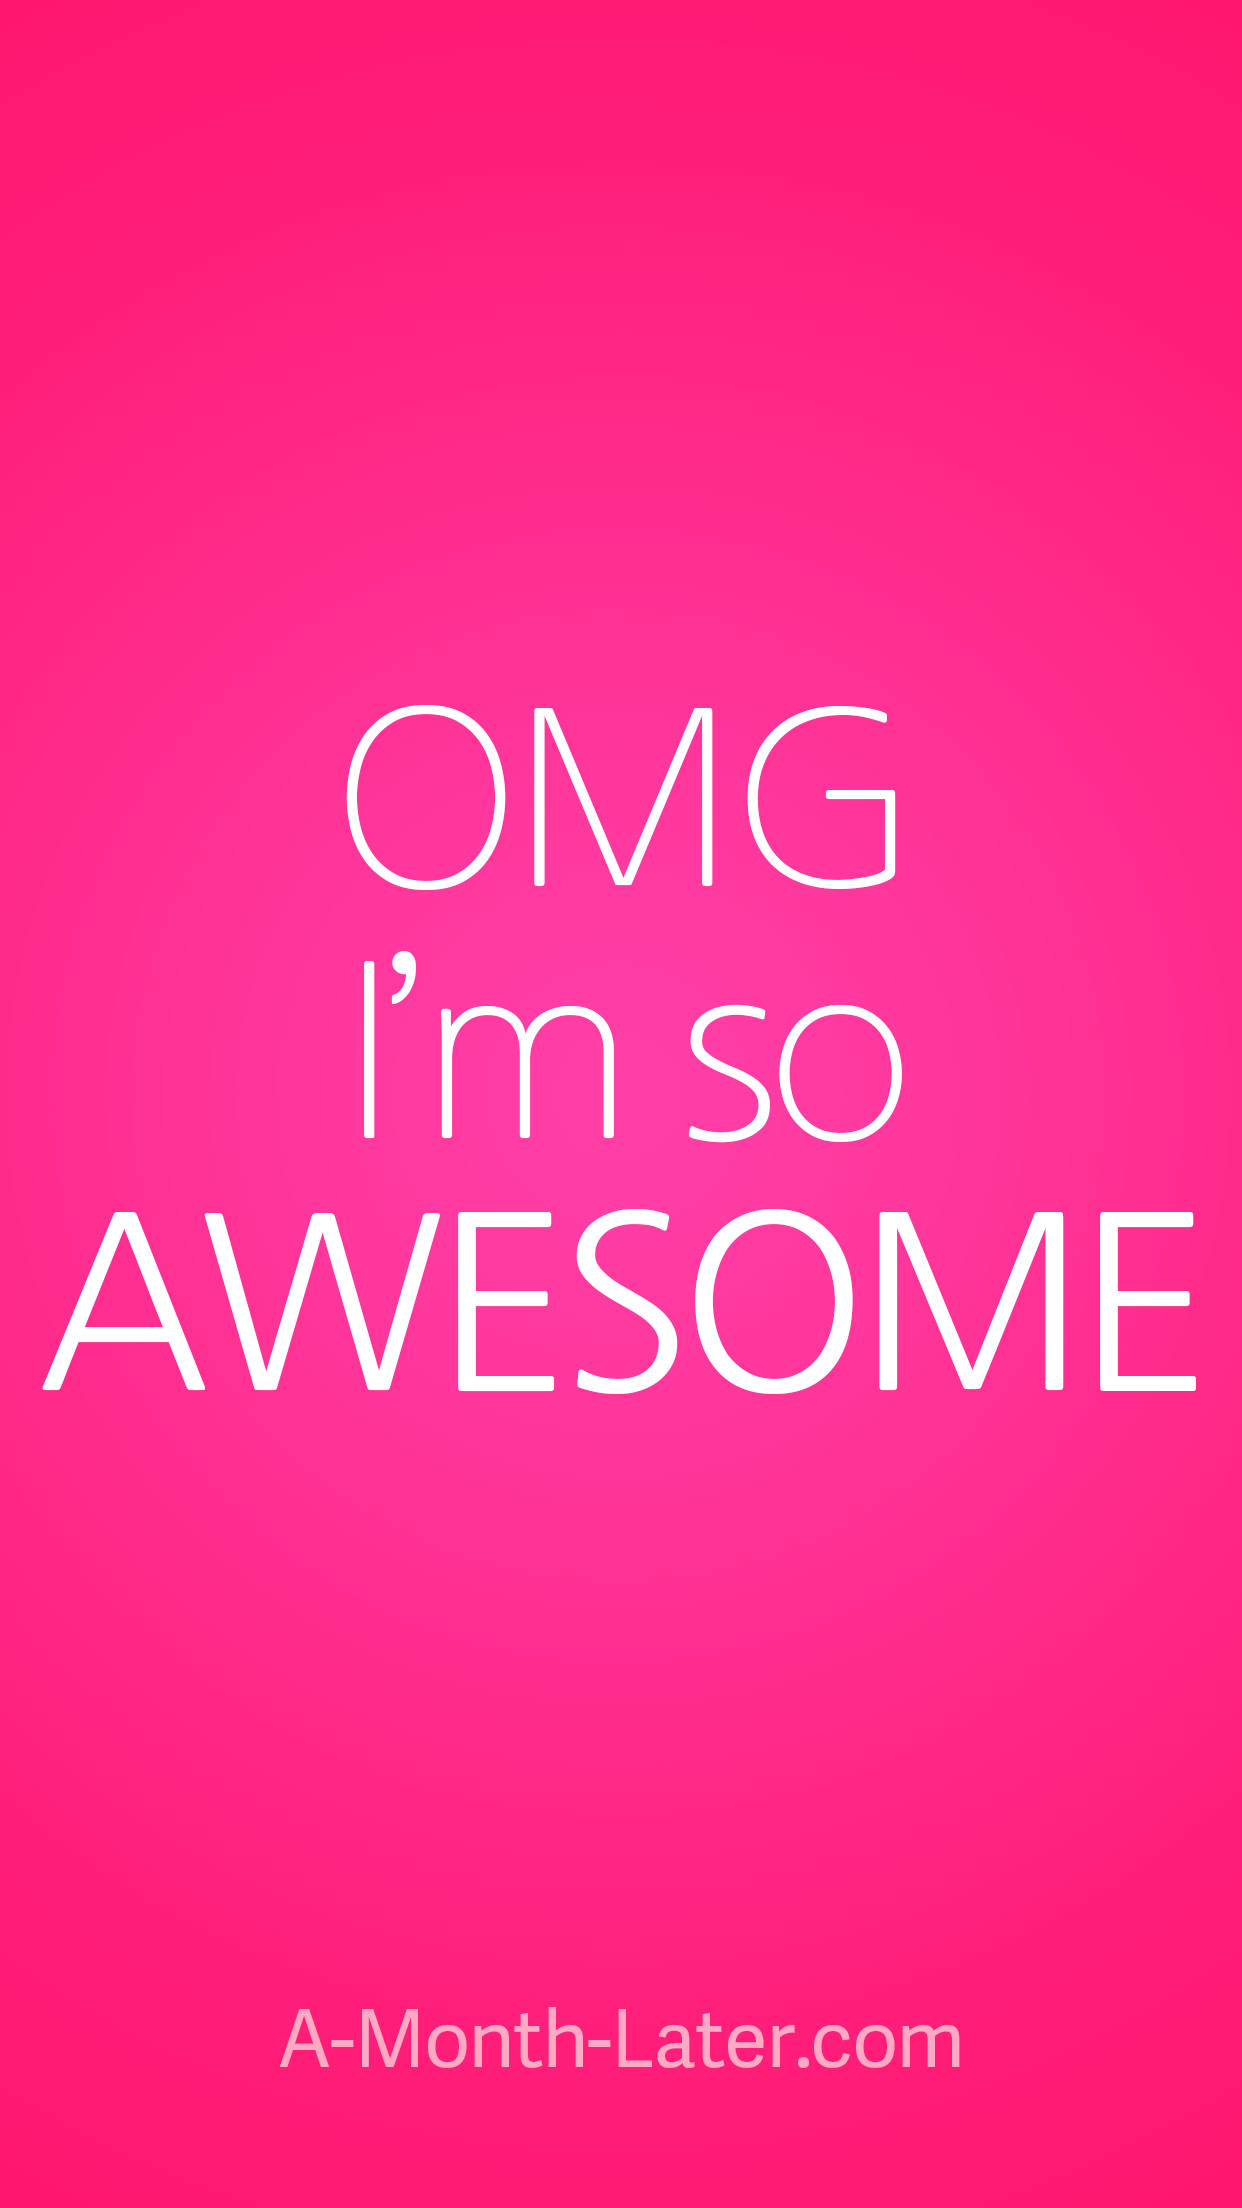 1242x2208 OMG, I'm so AWESOME iPhone wallpaper from http://a-